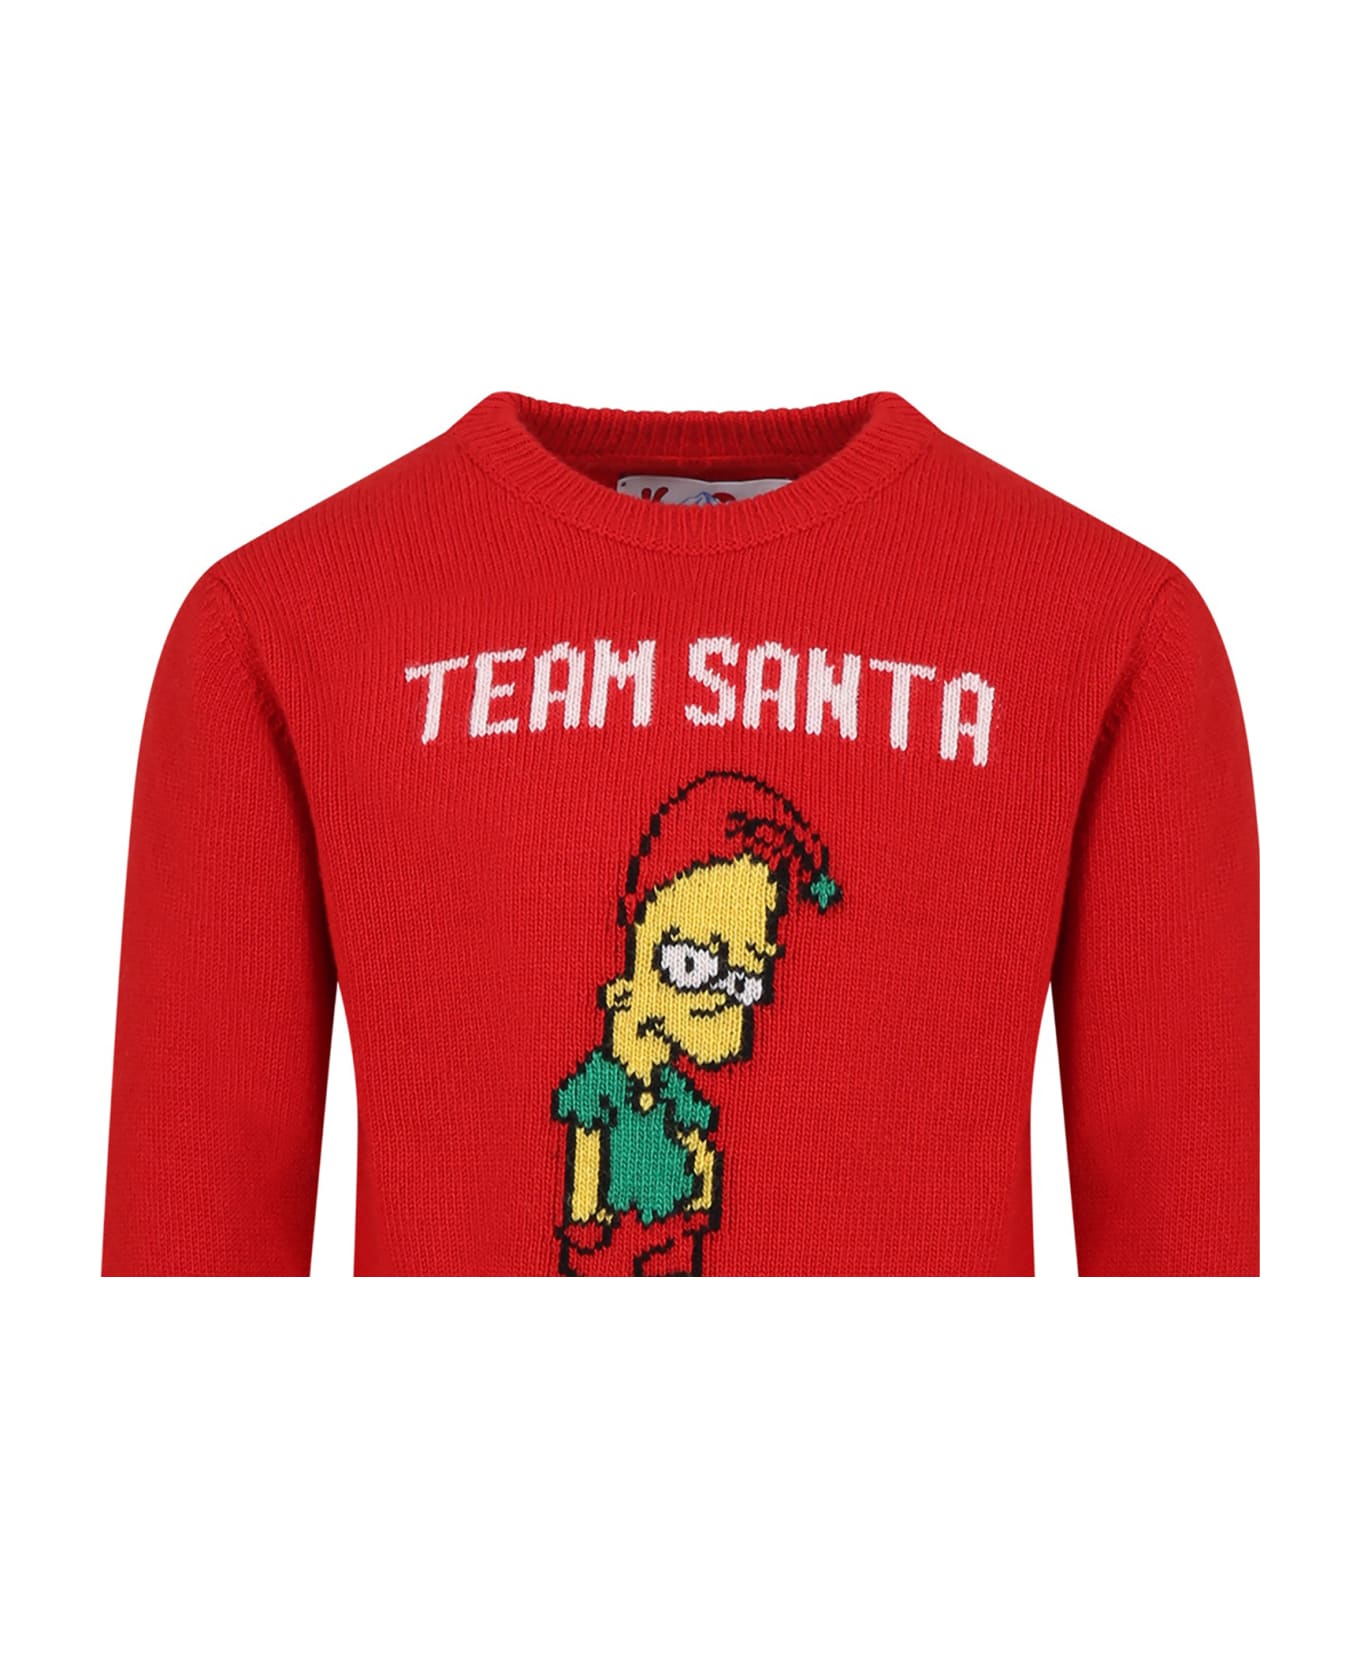 MC2 Saint Barth Red Sweater For Boy With Bart Simpson - Red